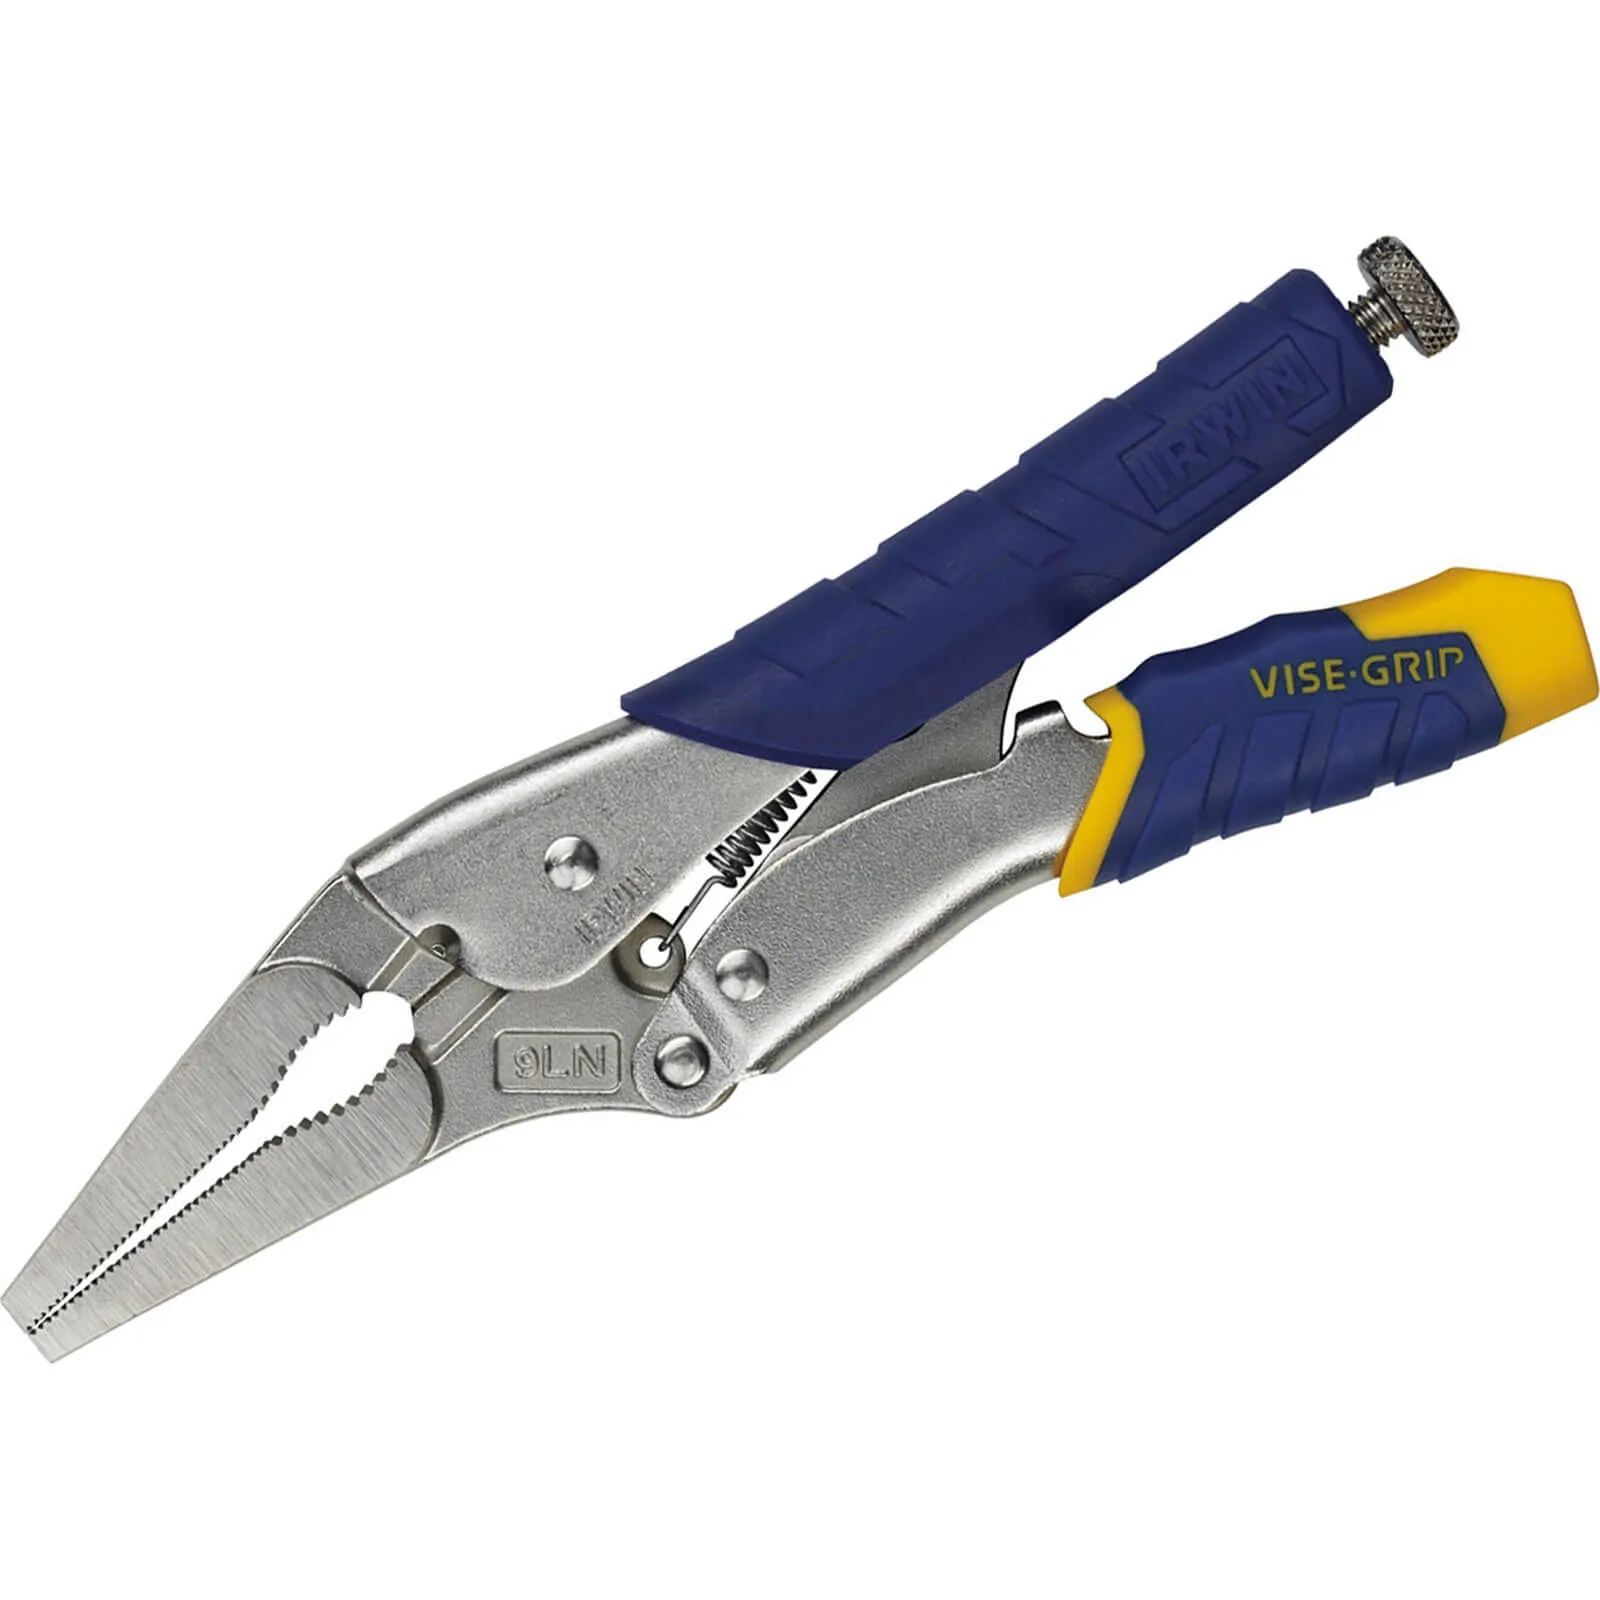 Irwin Vise Grip Long Nose Fast Release Locking Pliers - 150mm